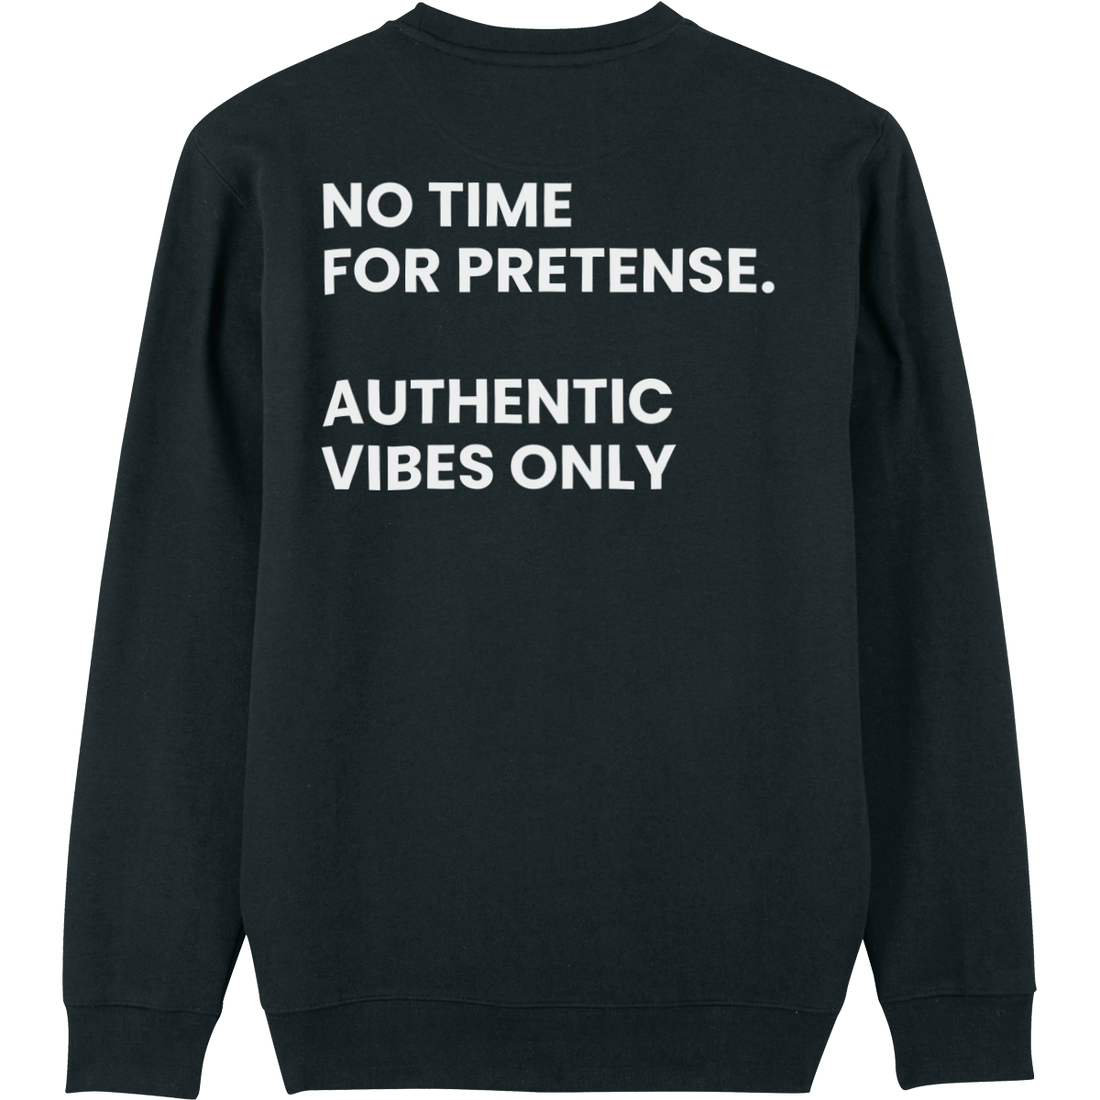 Authentic Vibes Only - Sweater